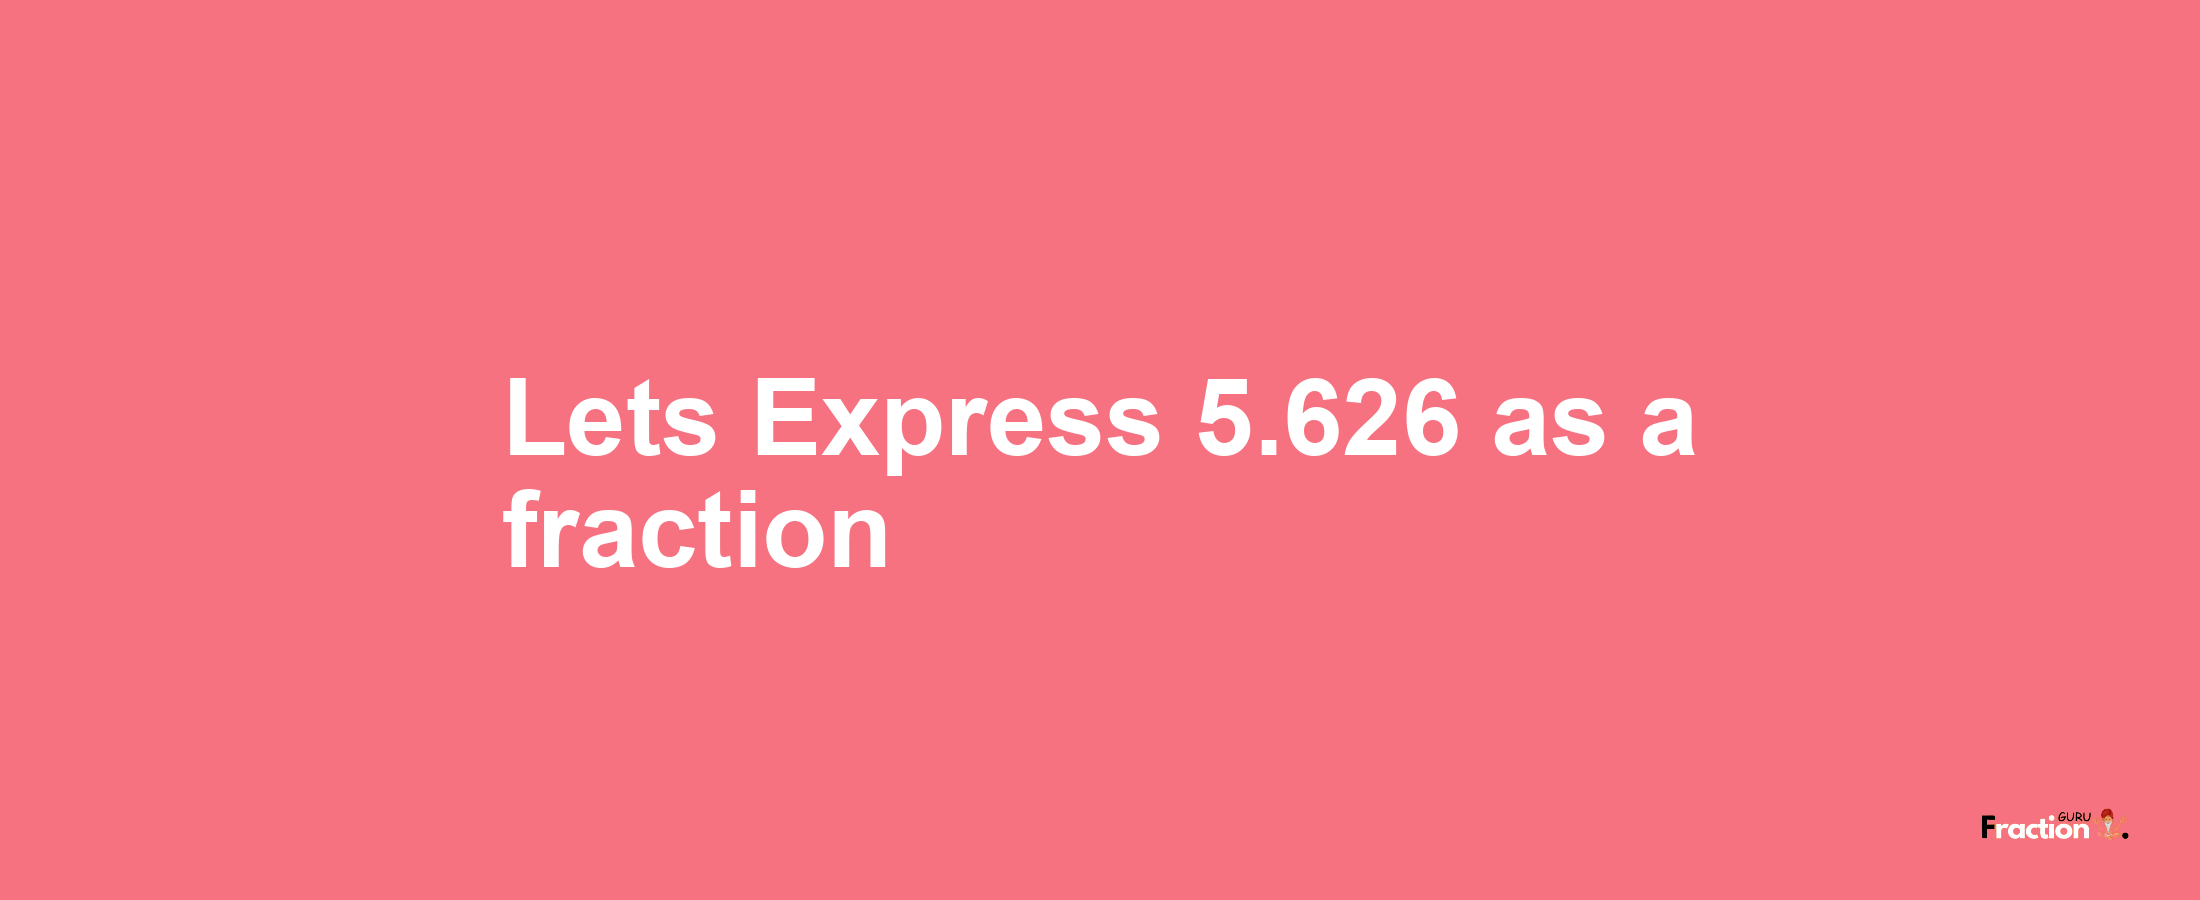 Lets Express 5.626 as afraction